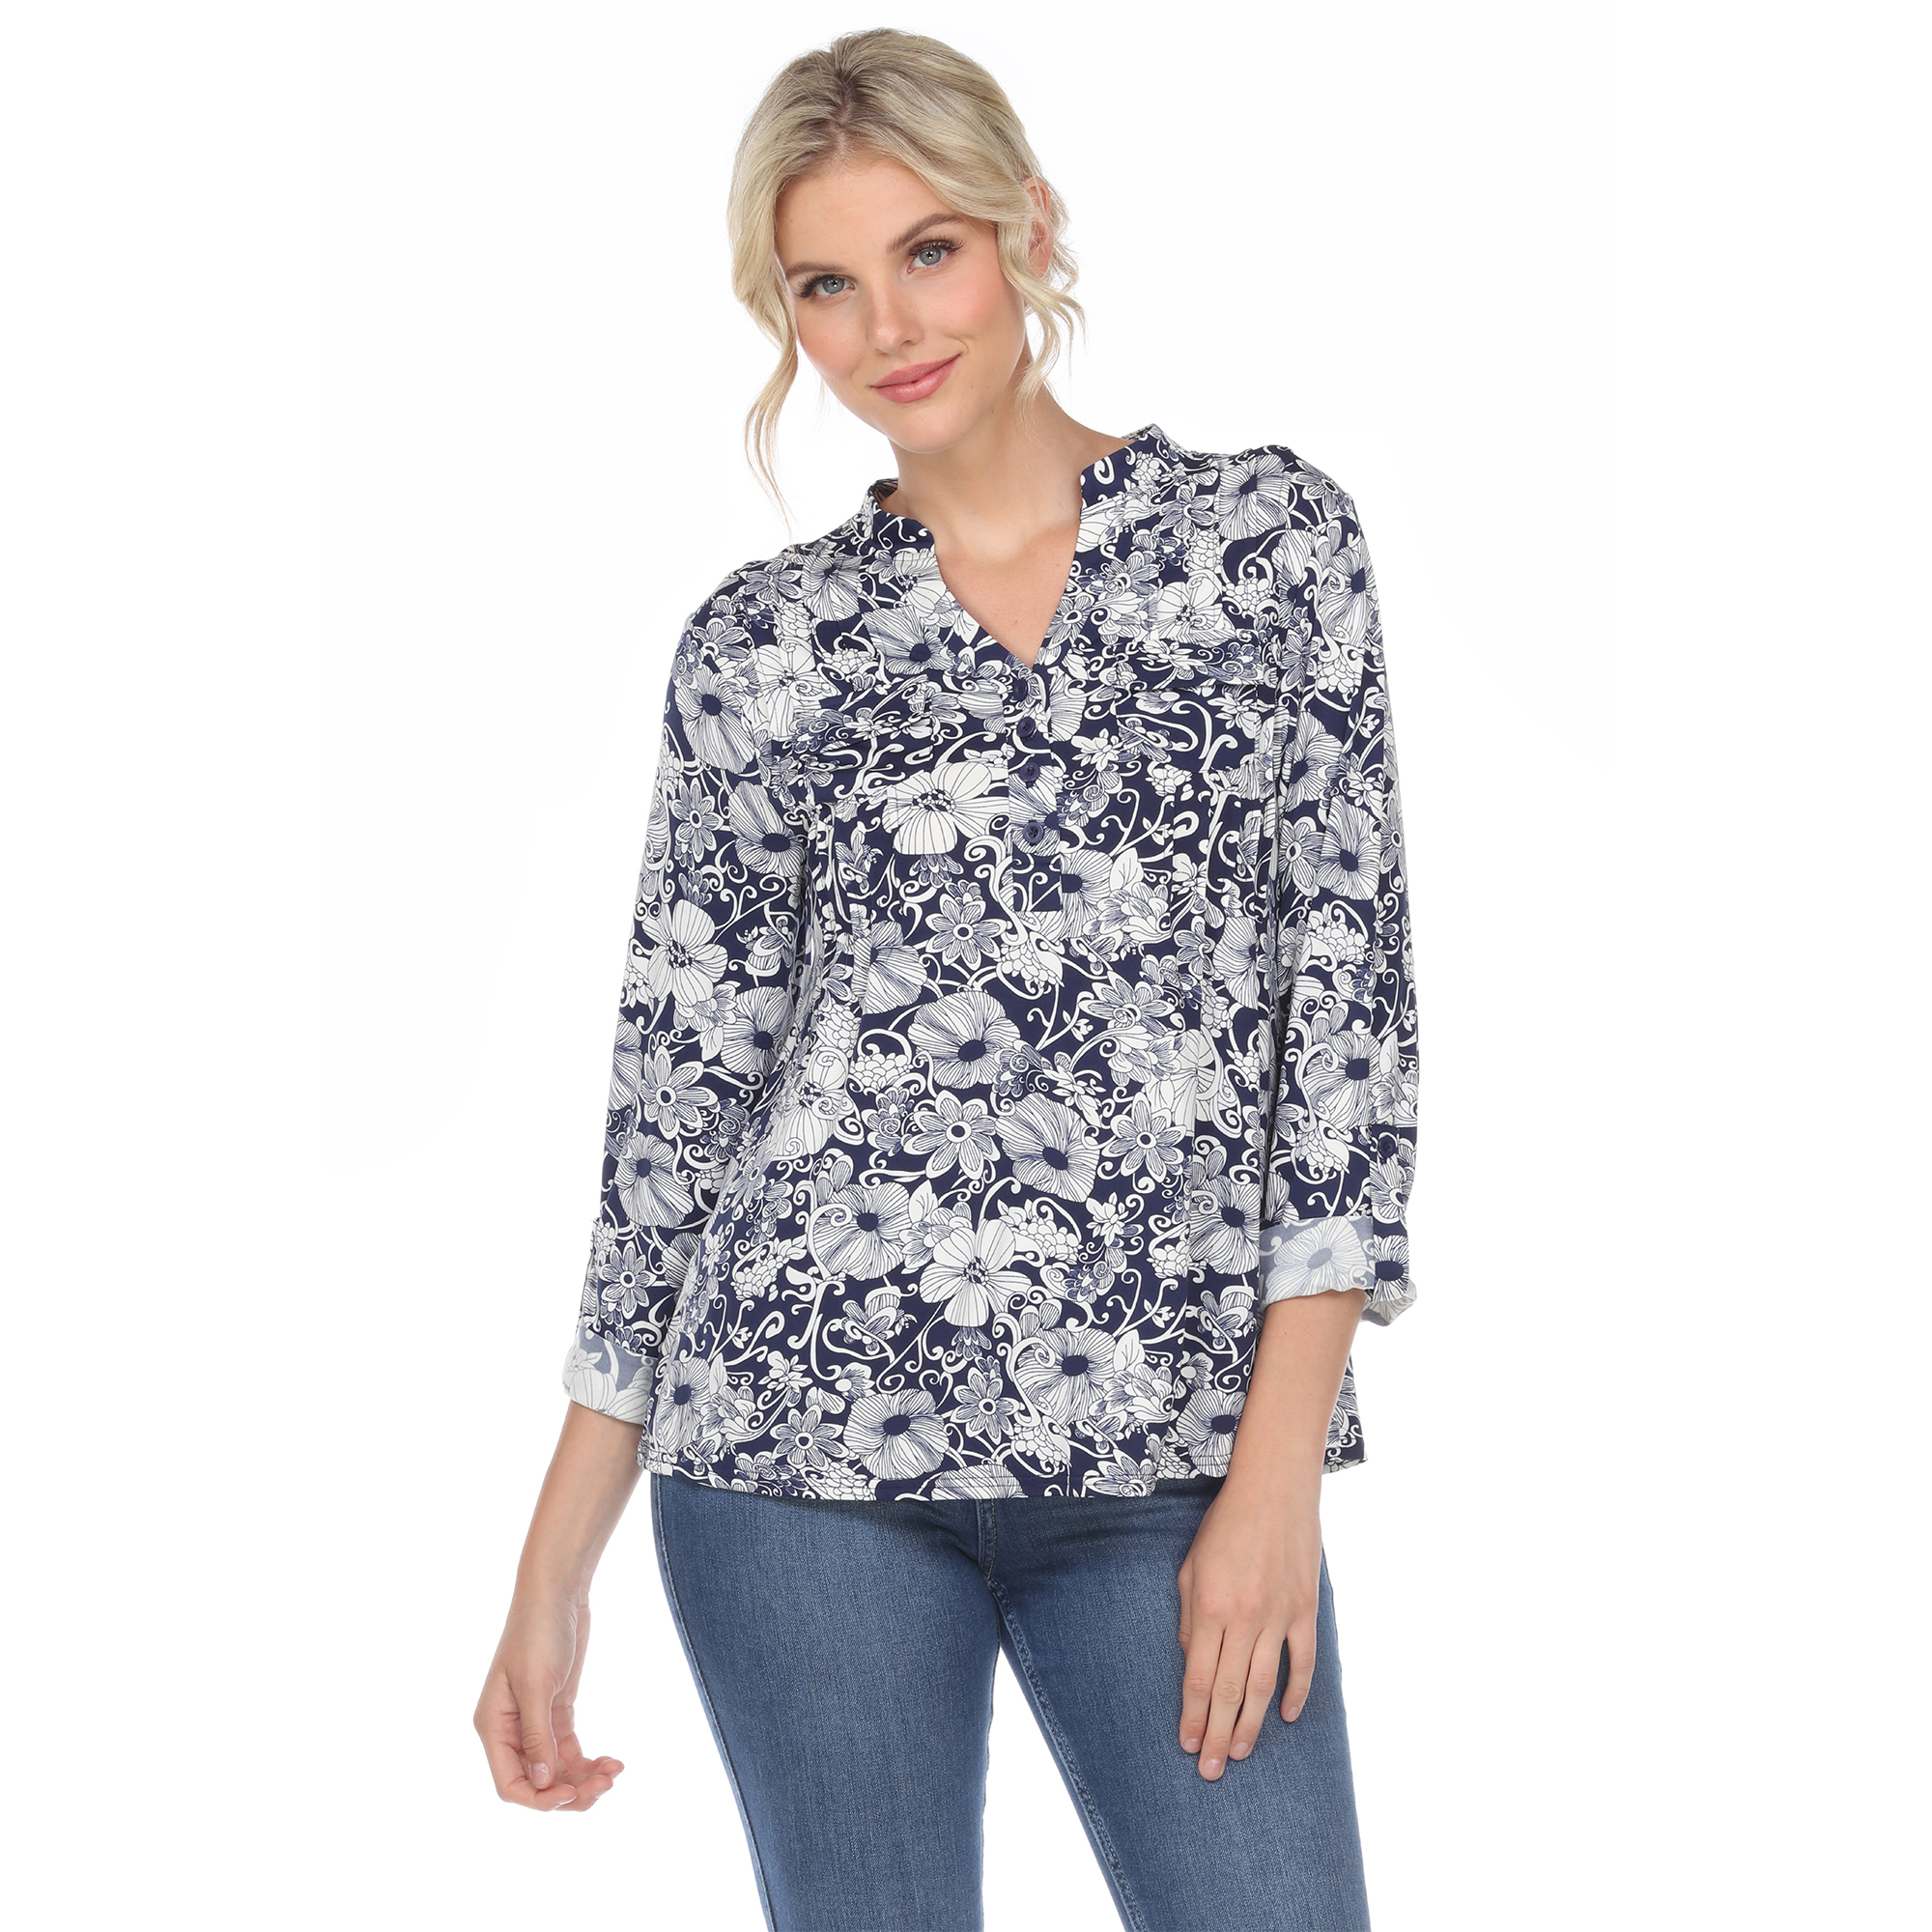 White Mark Women's Pleated Long Sleeve Floral Print Blouse - Black, X-Large